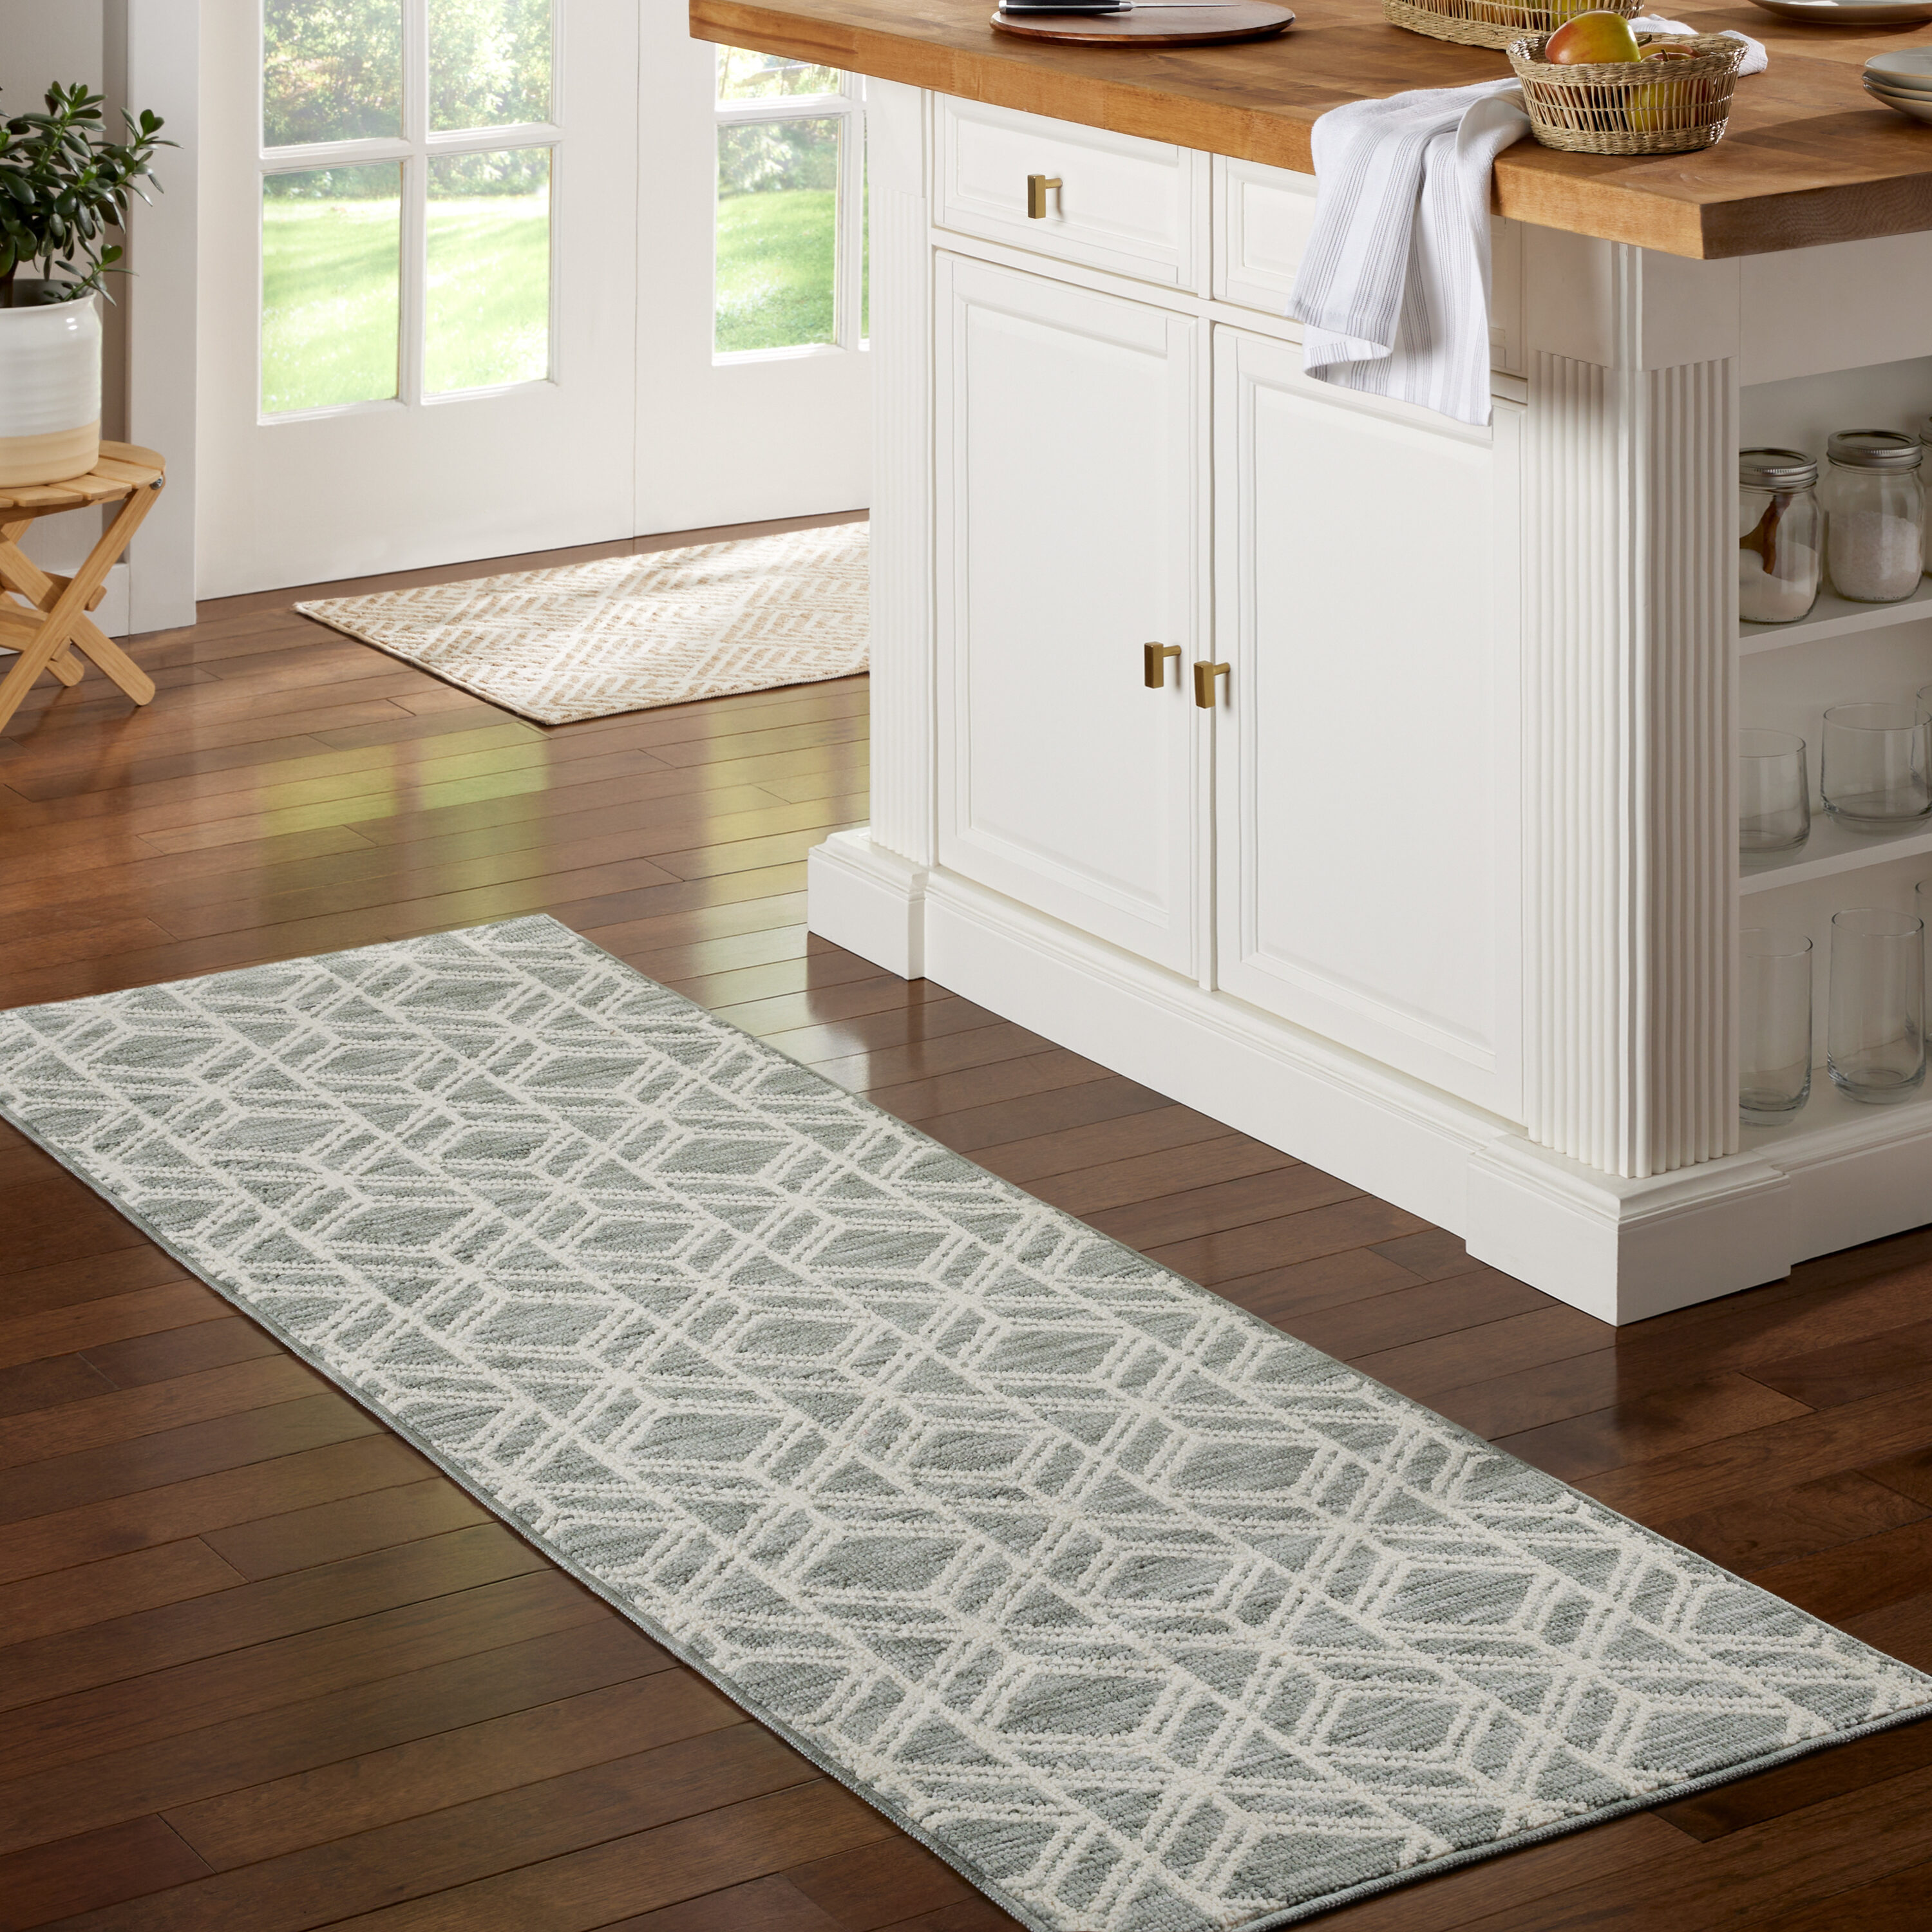 KANGAROO 3/4 Thick Superior Comfort, Relieves Pressure, All Day Ergonomic  Stain Resistant Floor Rug Anti